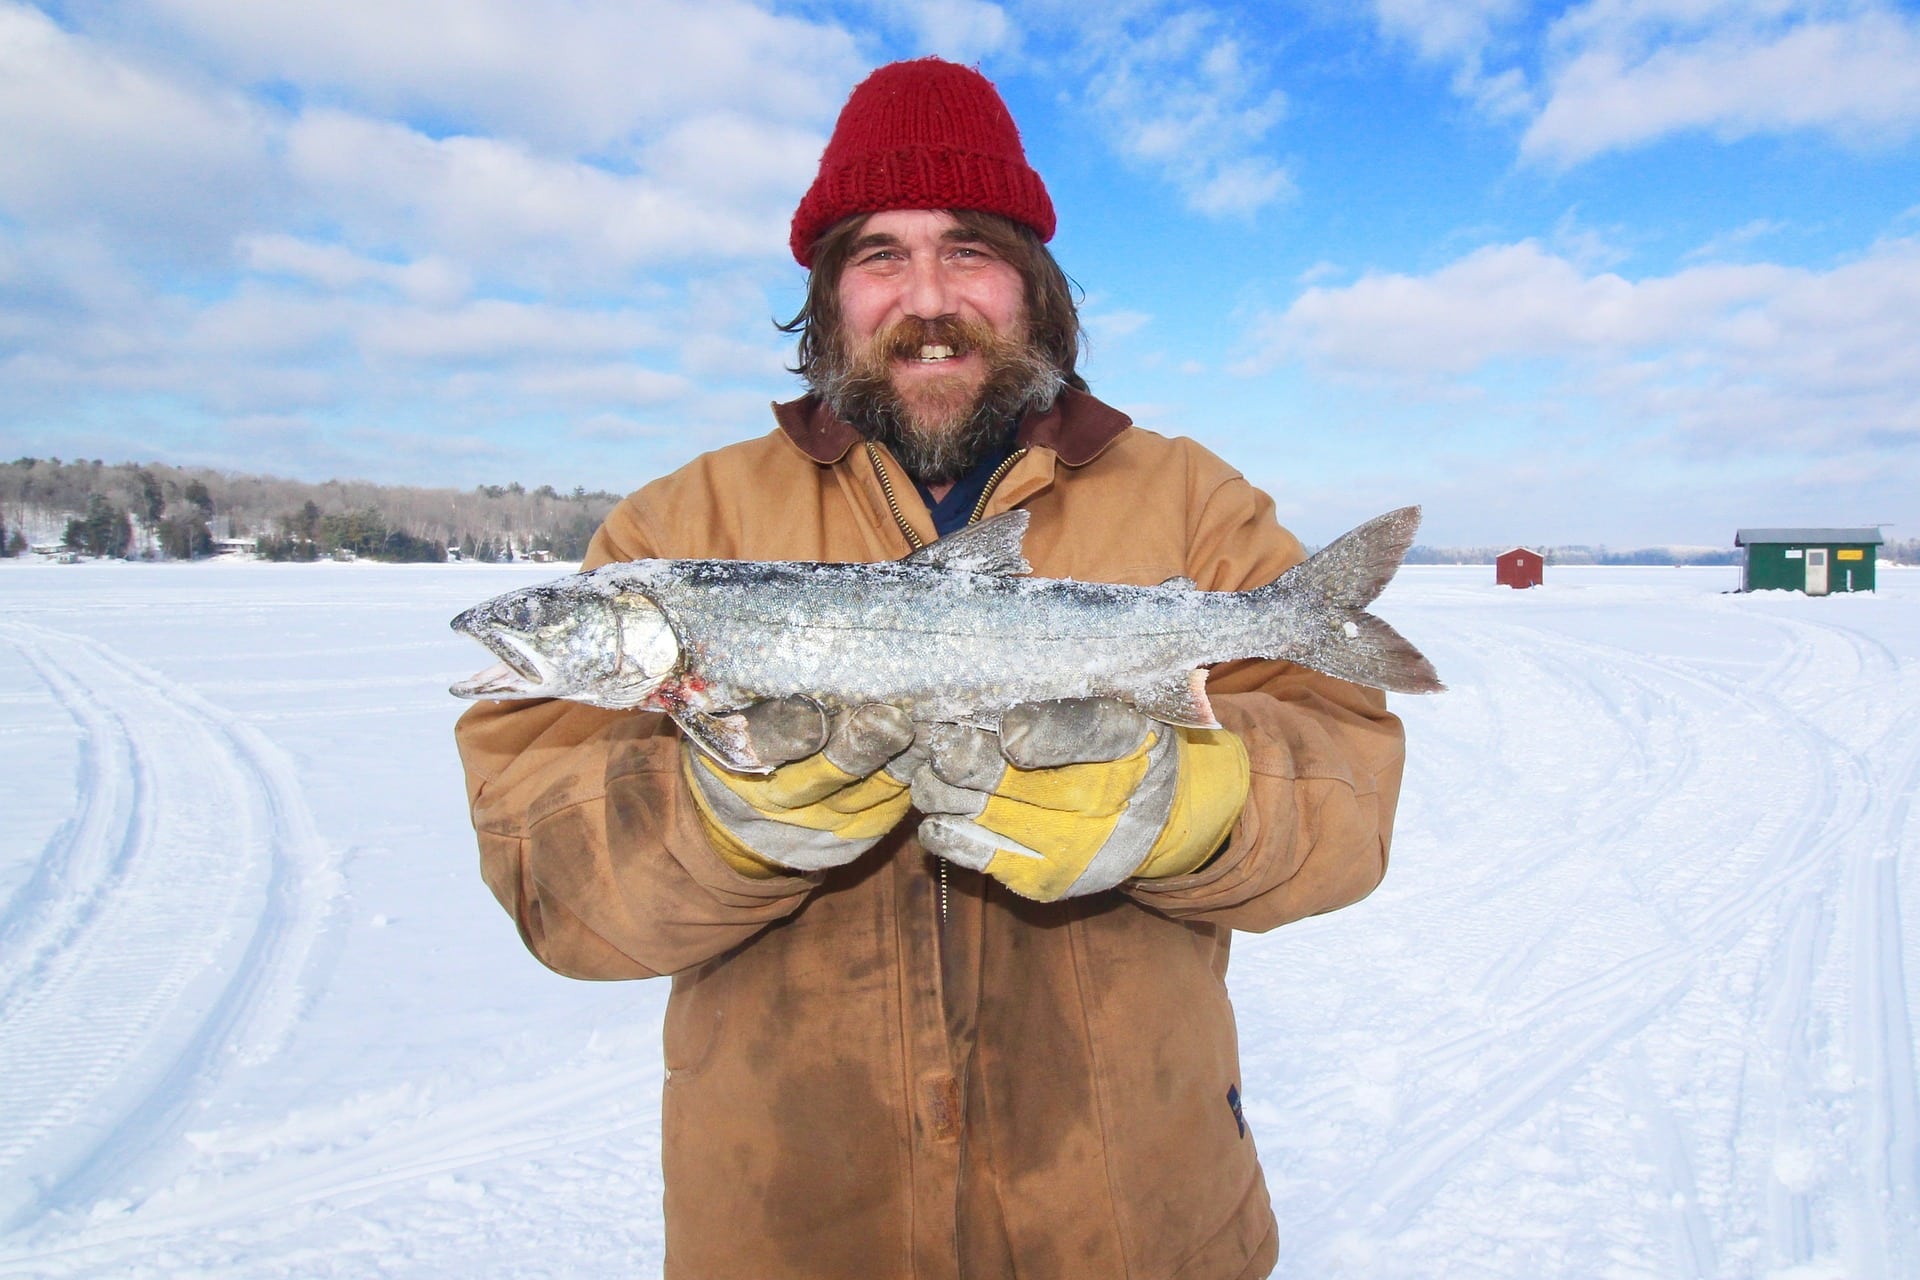 Bearded man in a red toque holds a trout freshly caught from the frozen lake underfoot.